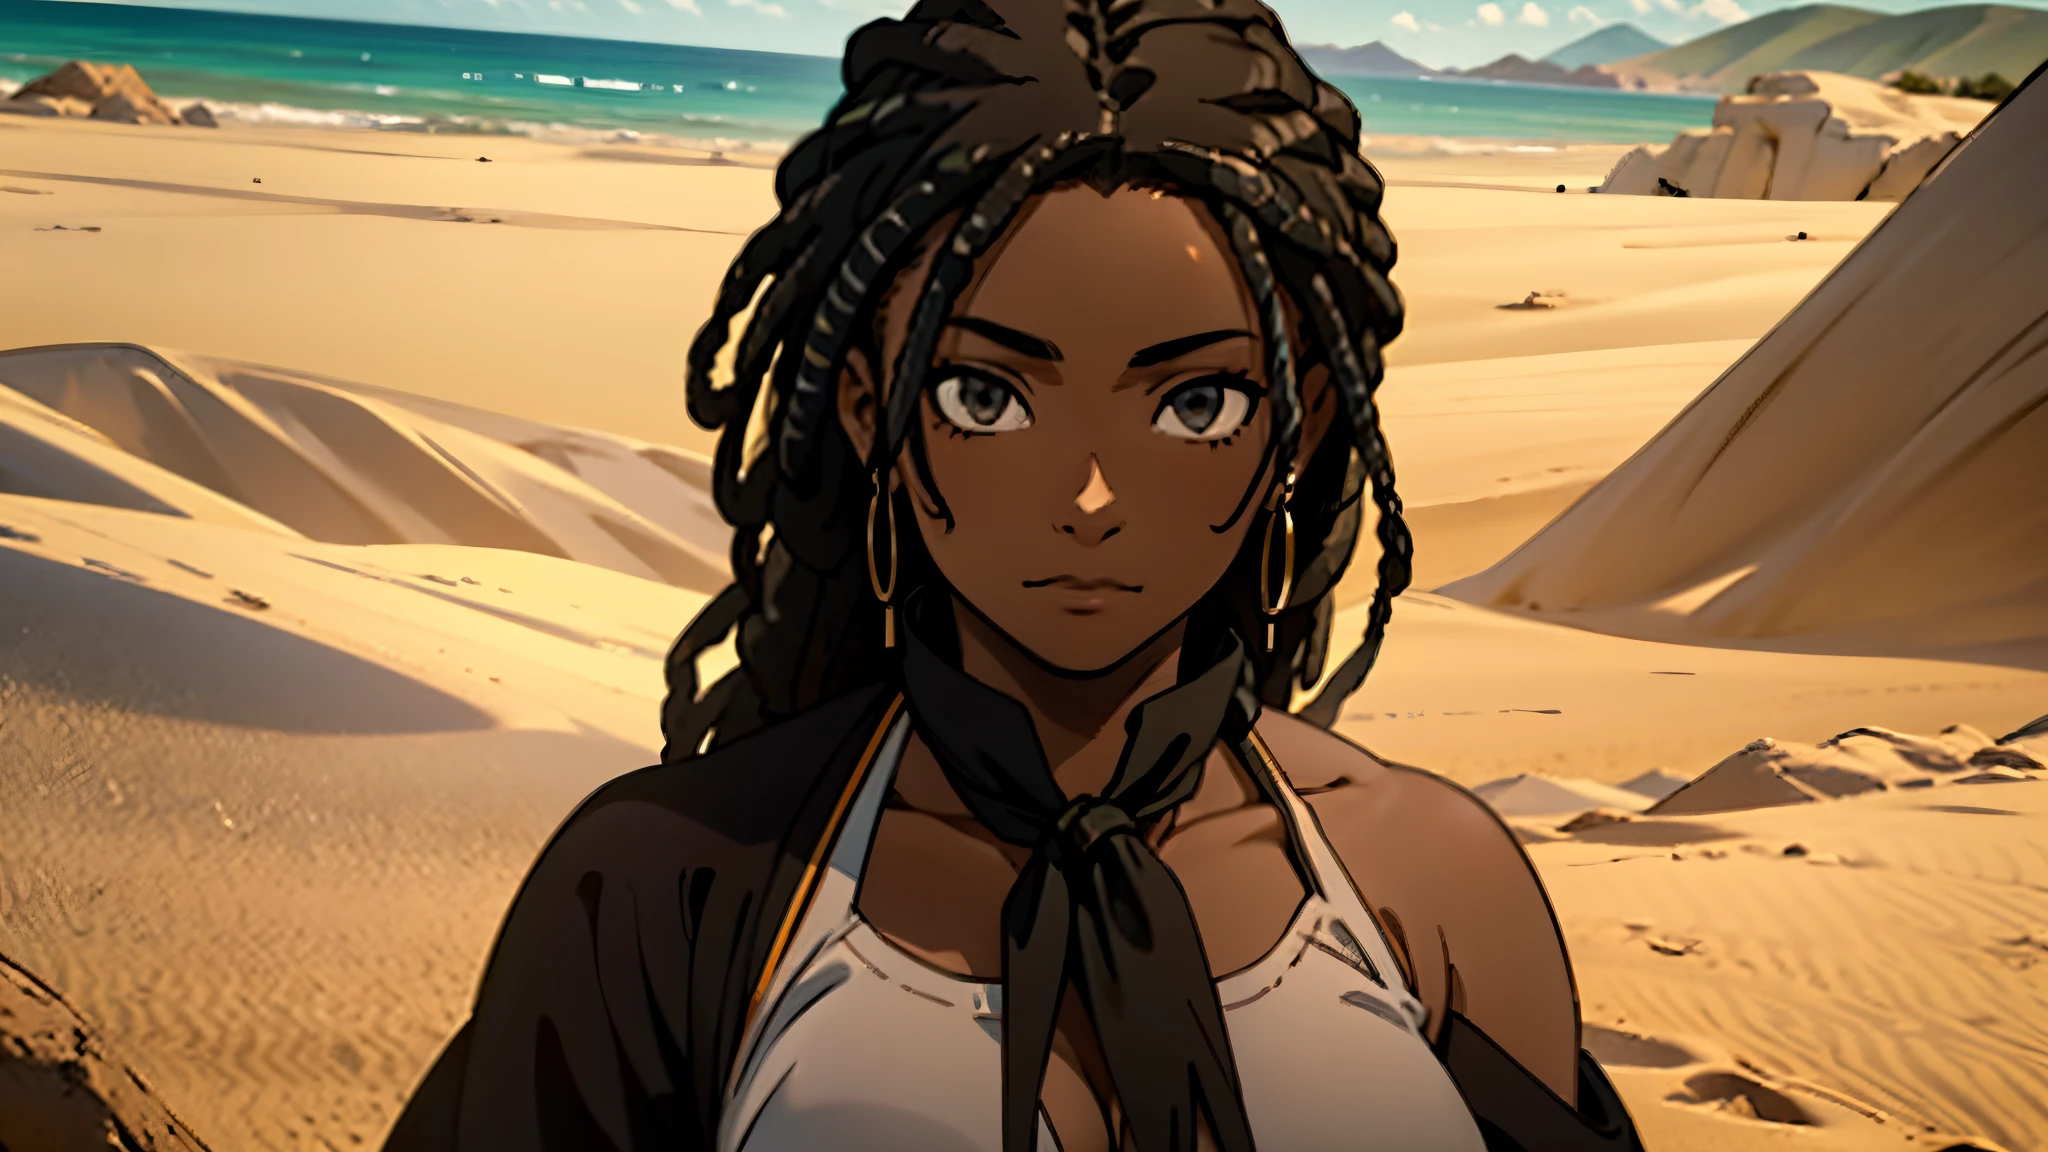 (best qualityer), anime styling, black female, very negative skin, linda, Perfect Anatomia, perfectbody,(with white hair), very voluminous hair, Dreadlocks, dreadslocks , Dreadlocks, Dreadlocks , Dreadlocks, Dreadlocks, Dreadlocks, Dreadlocks,wearing a desert tunic, neck scarves, golden beads, desert background with lots of sand, beautiful girl.